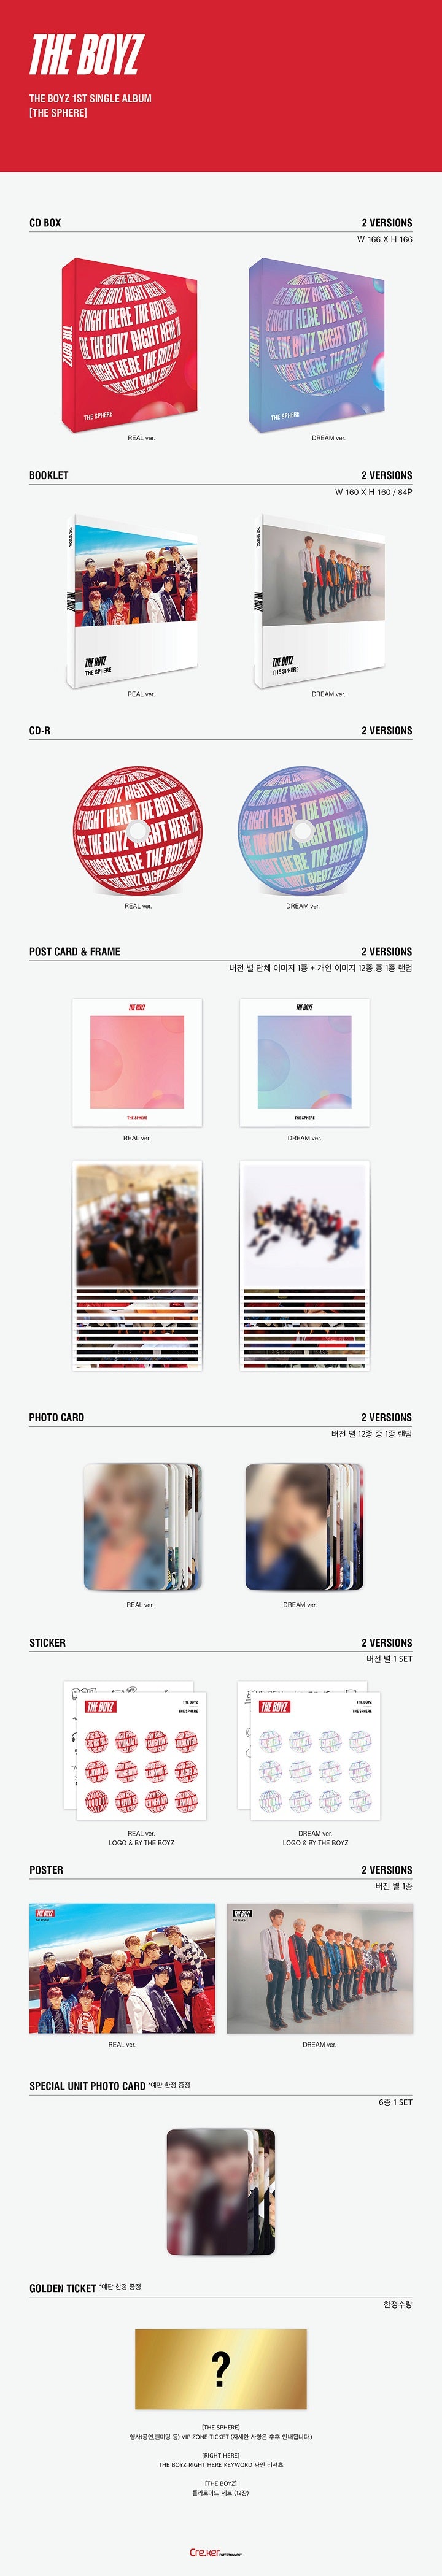 1 CD
1 Booklet (84 pages)
1 Paper Frame
2 Post Photos
1 Photo Card
1 Sticker